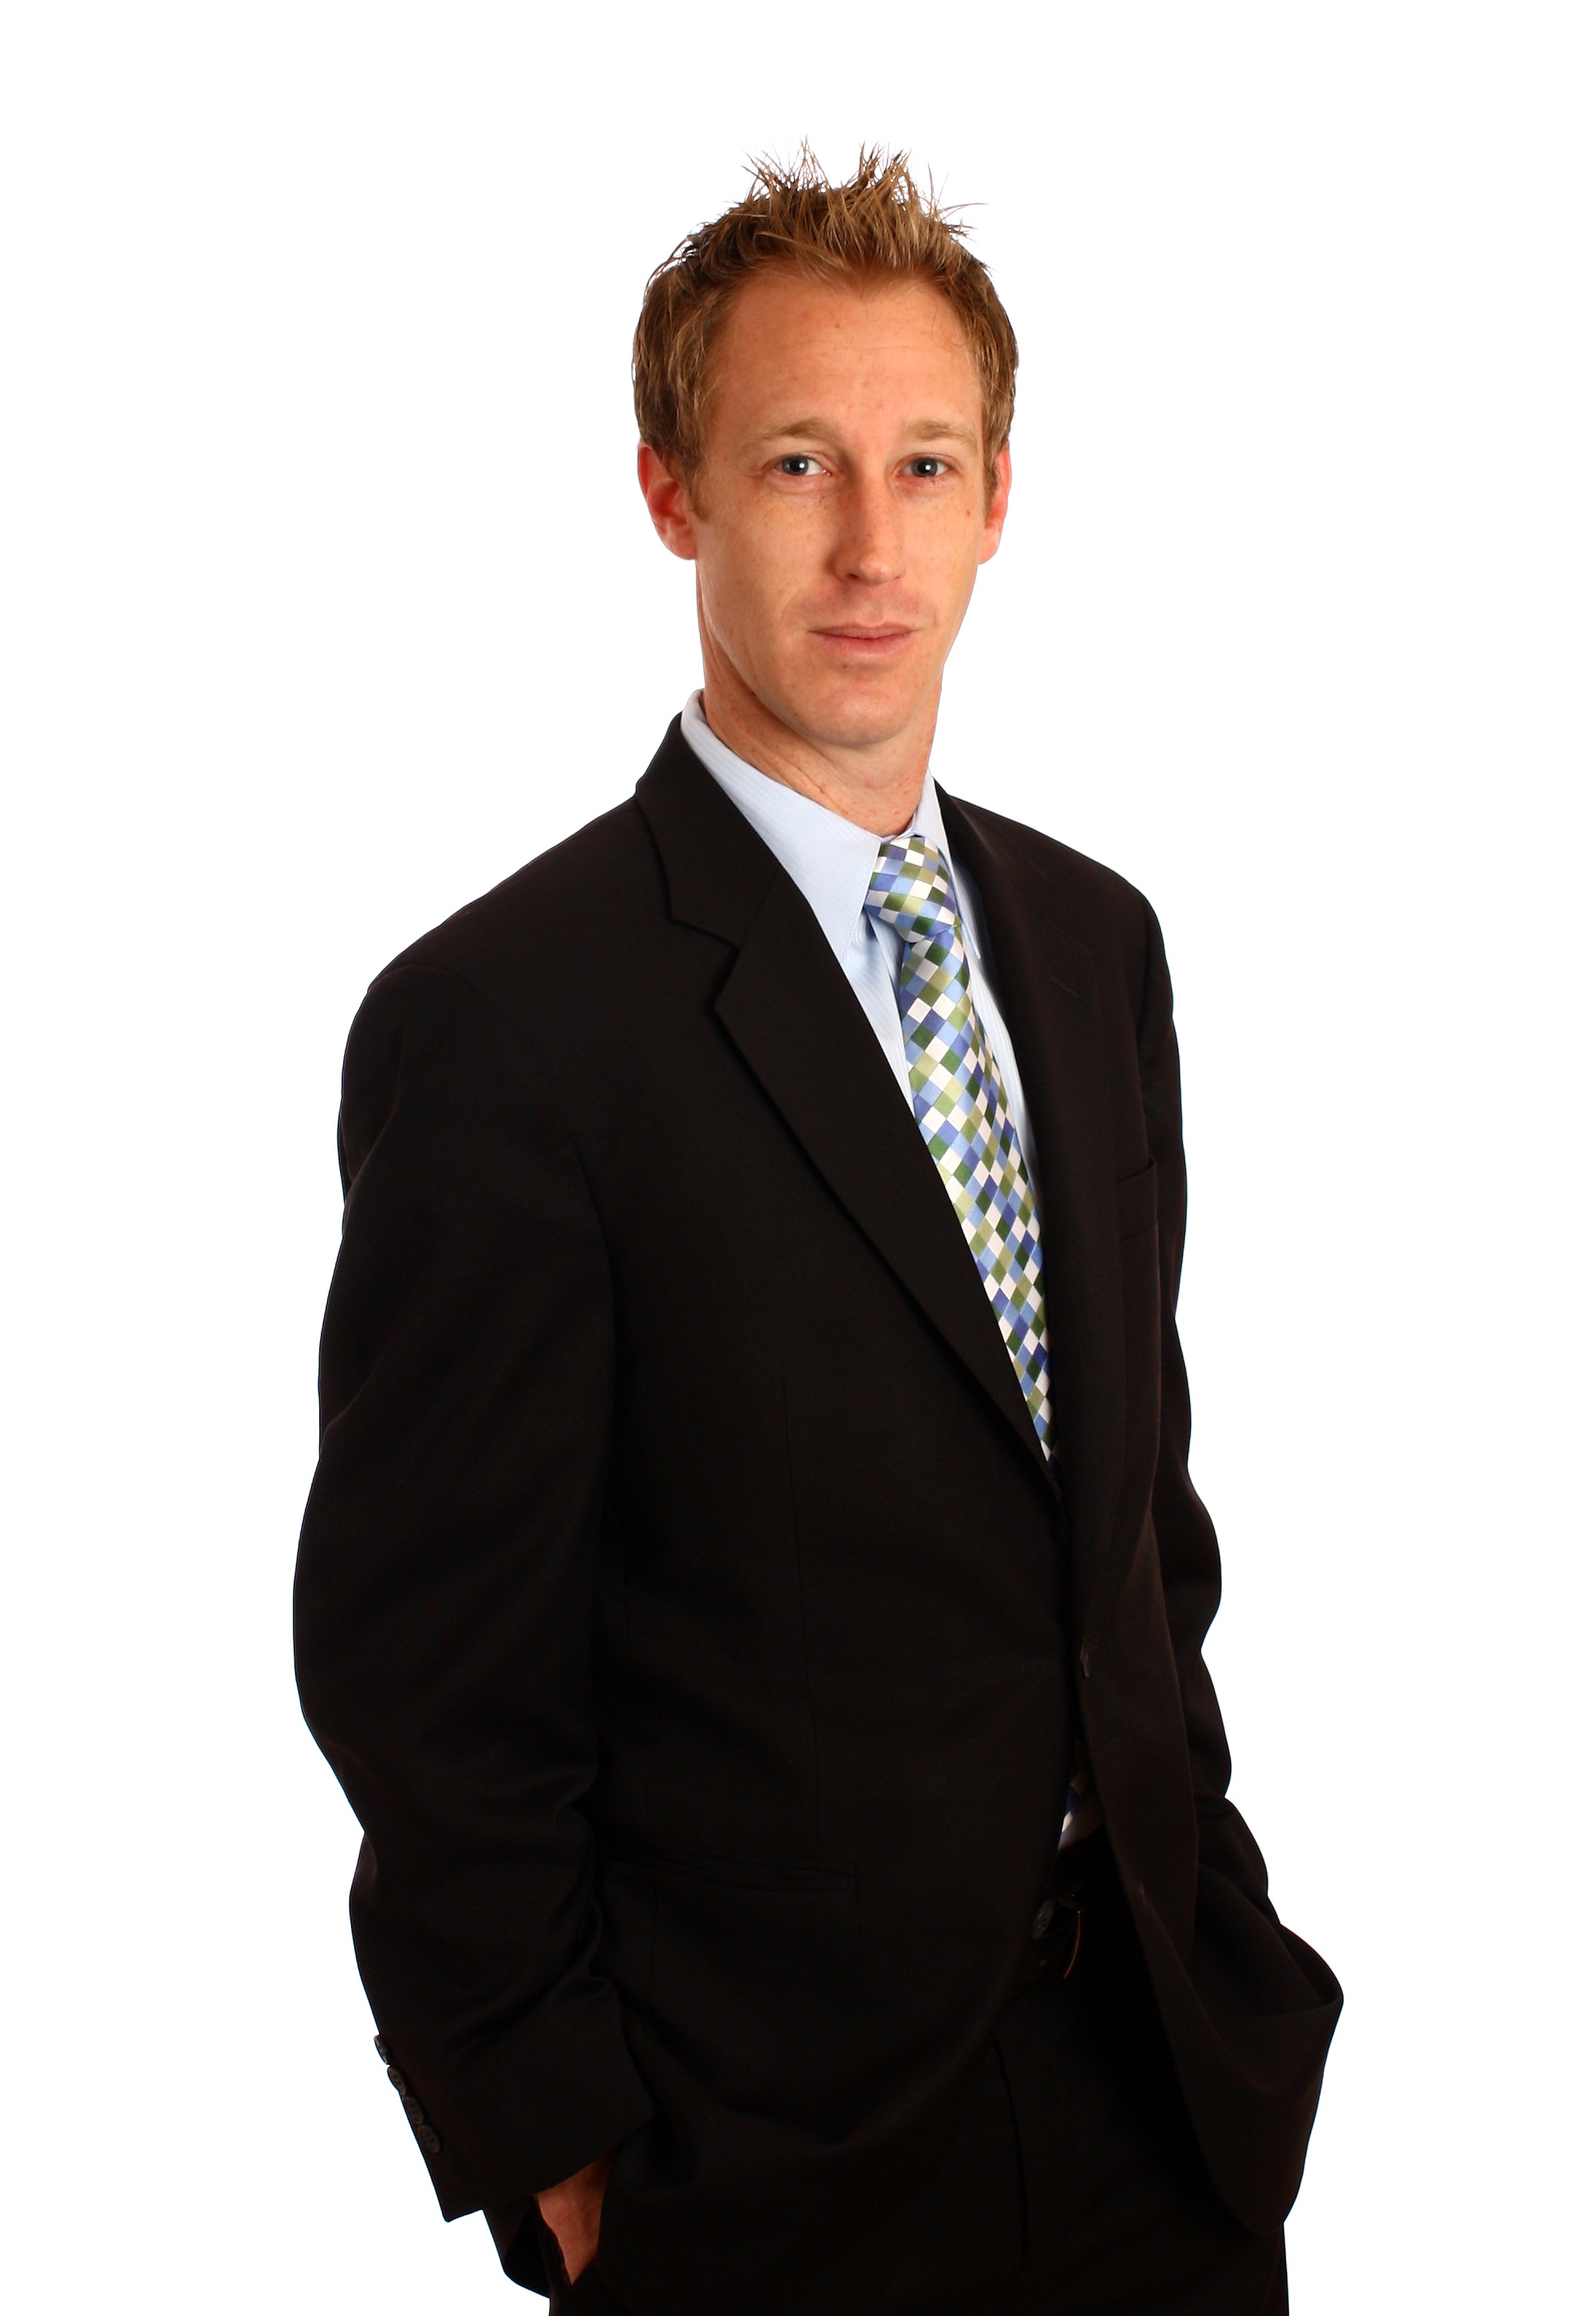 A young businessman in a suit photo